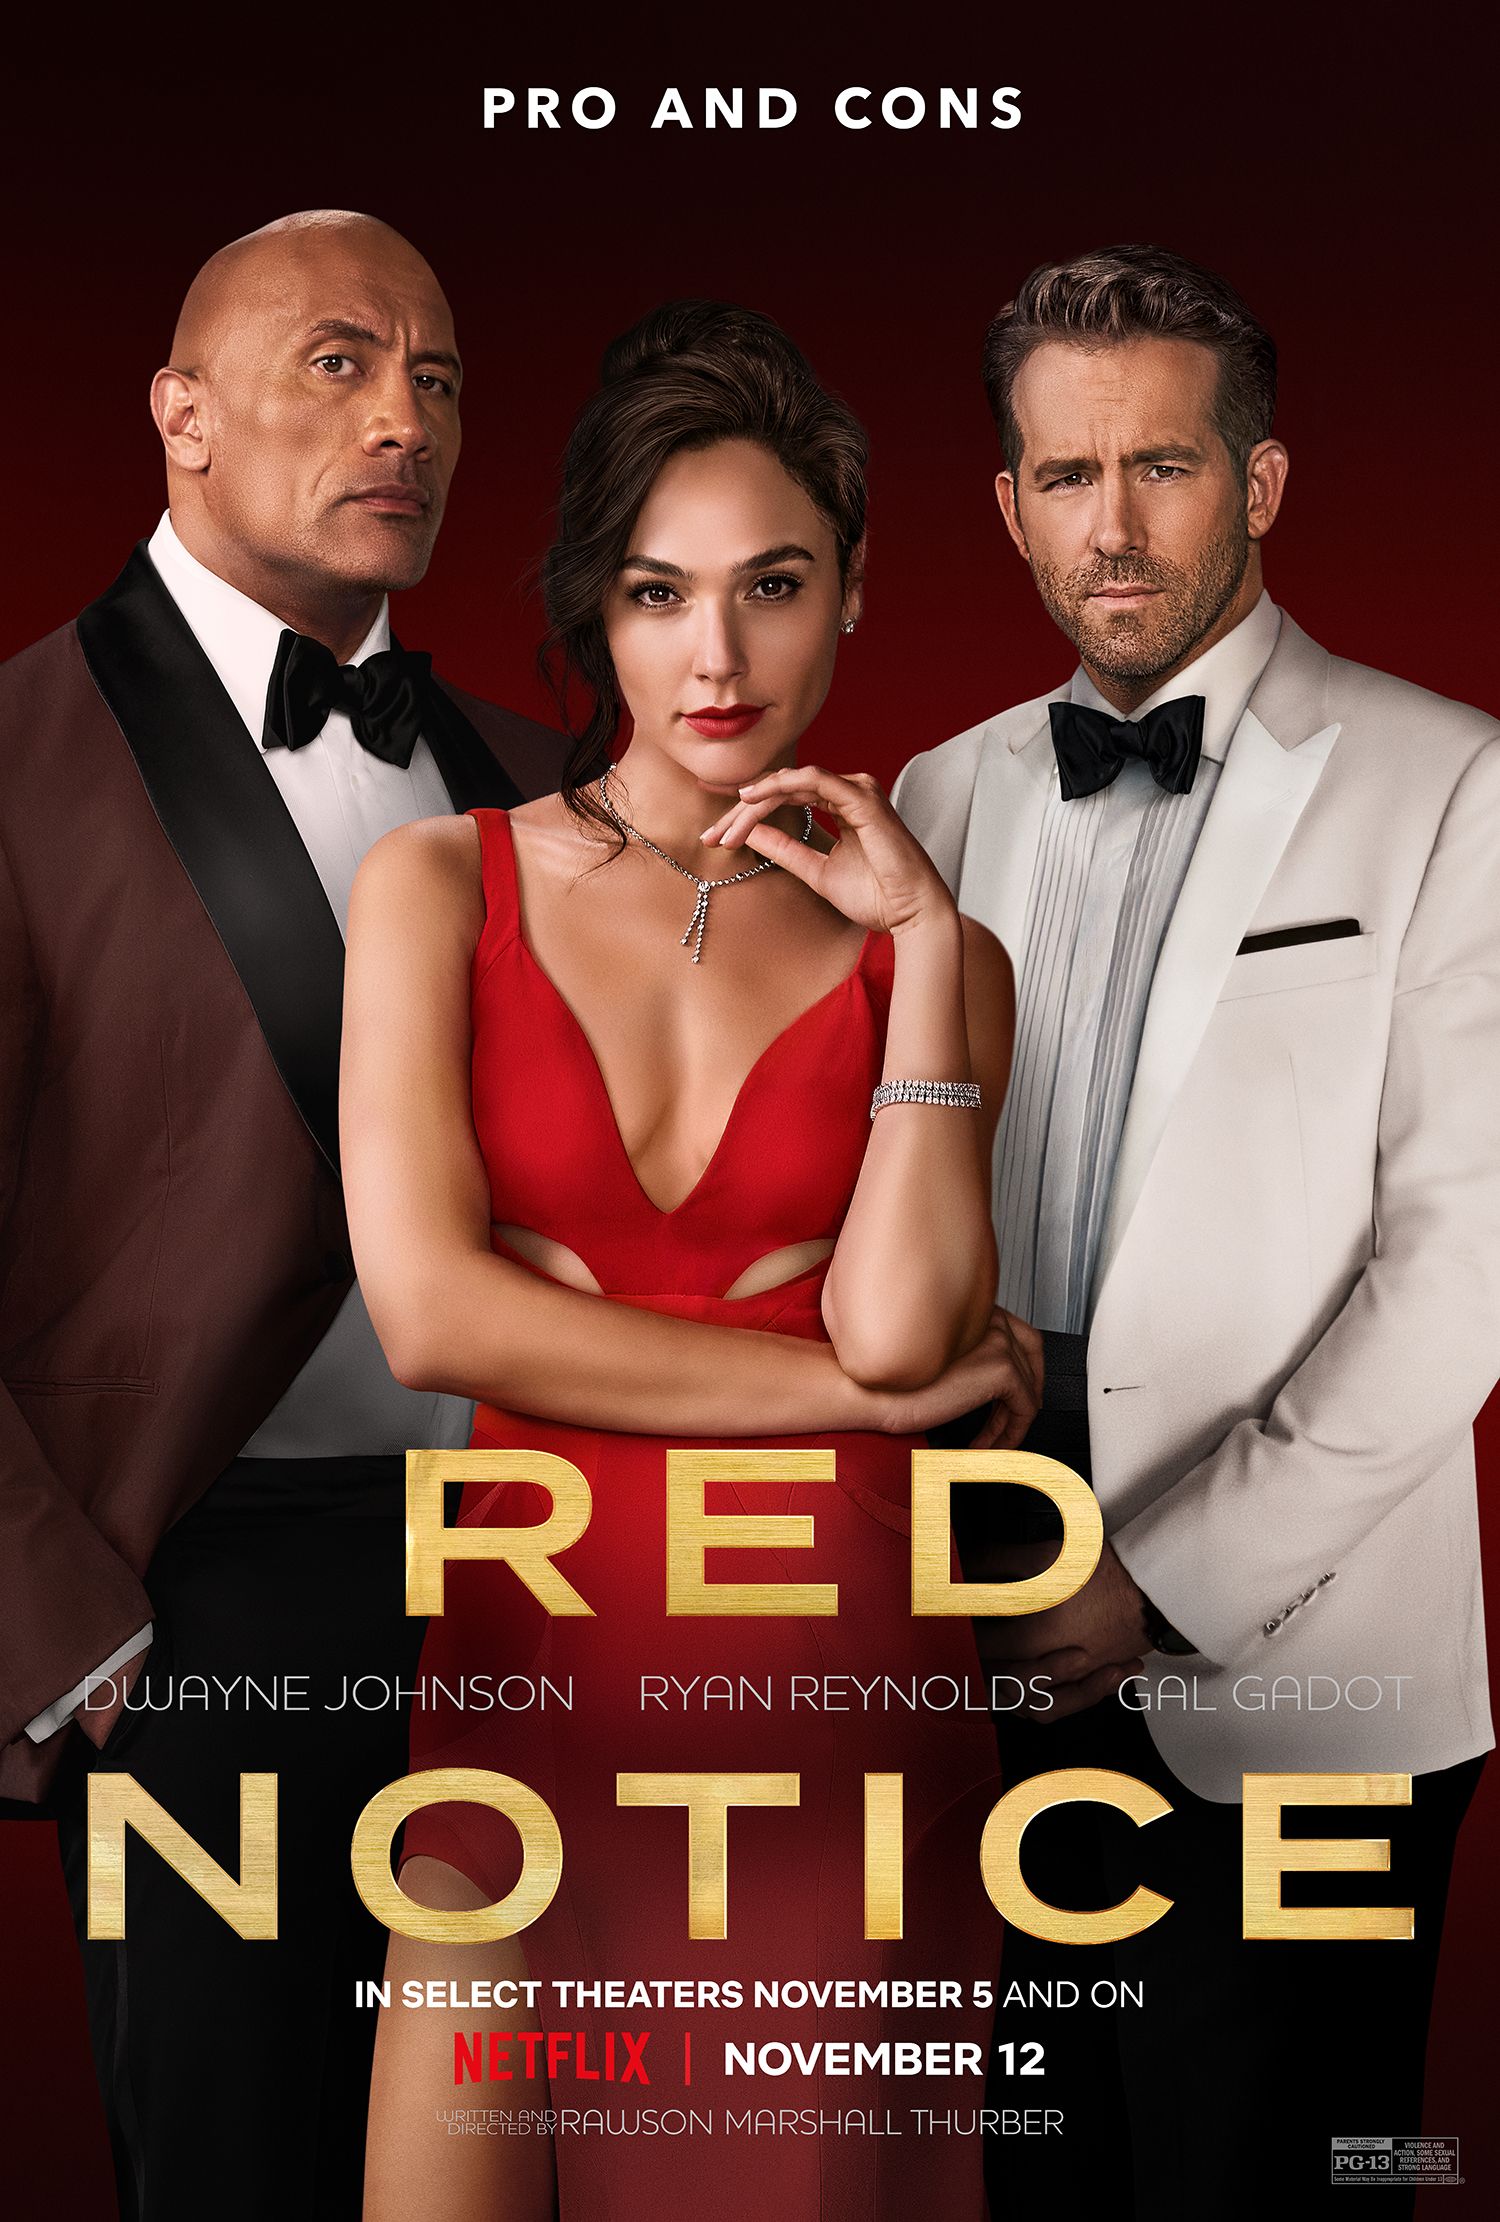 Johnson Gadot & Reynolds Are Smooth Criminals In Red Notice Posters